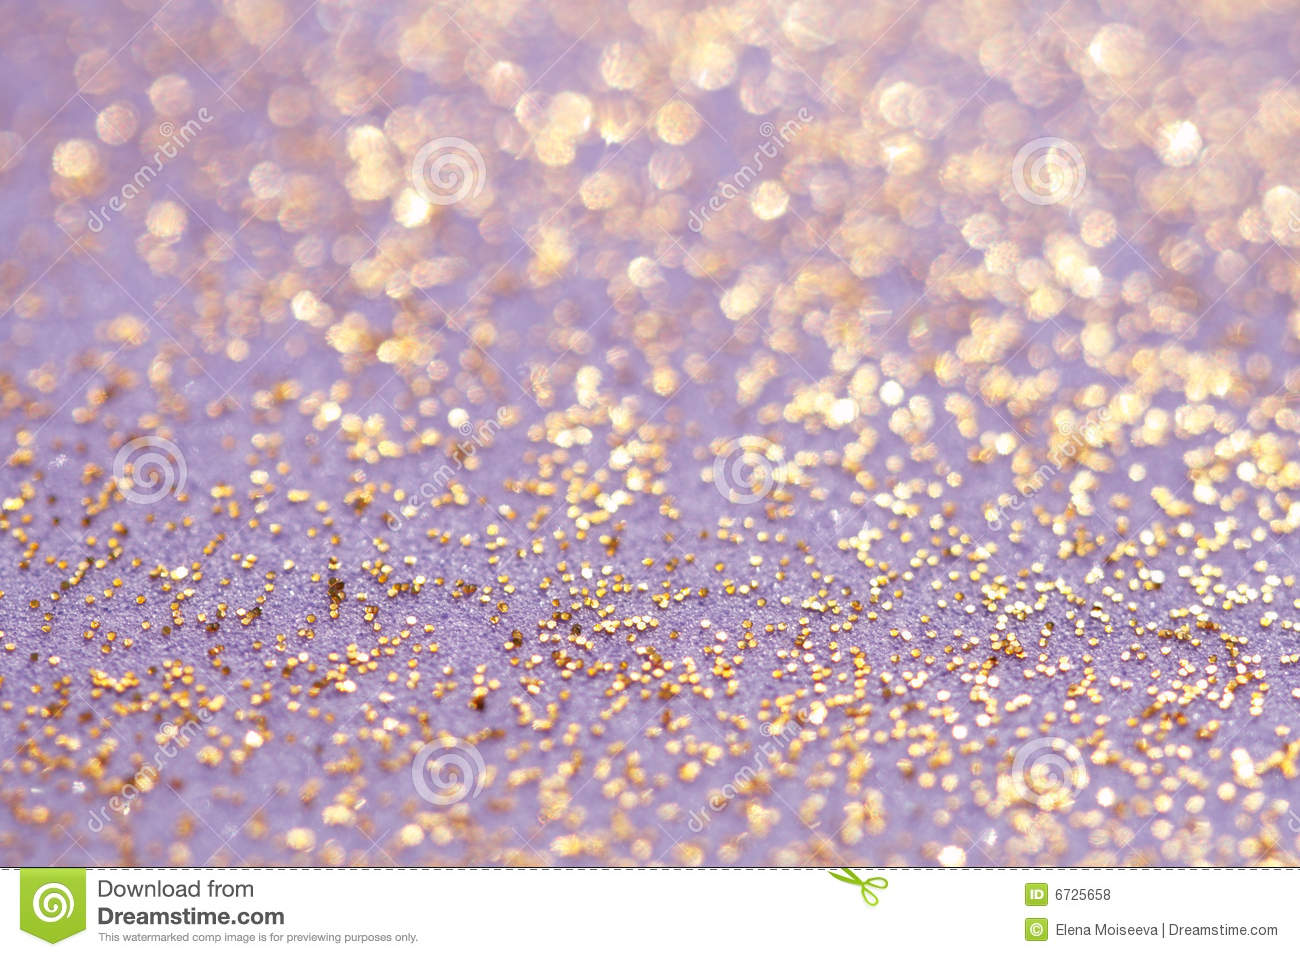 Glitter Stock Photos, Images, & Pictures - 245,231 Images